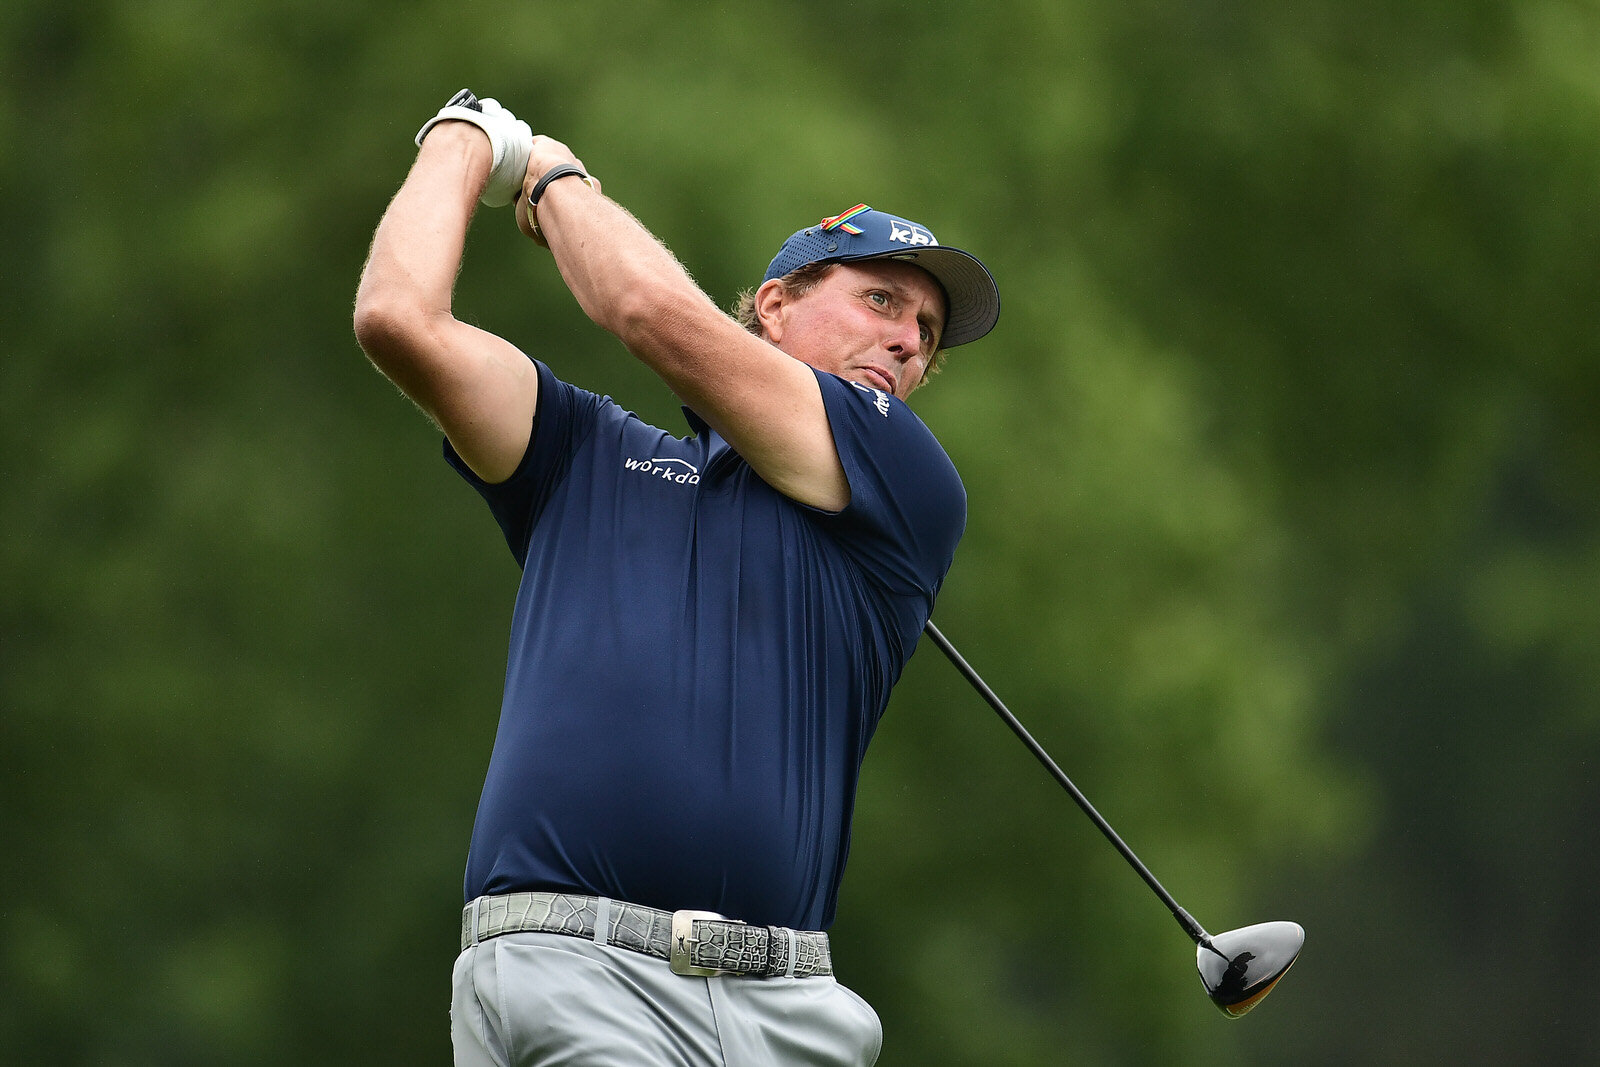  MEMPHIS, TENNESSEE - AUGUST 01: Phil Mickelson of the United States plays his shot from the second tee during the third round of the World Golf Championship-FedEx St Jude Invitational at TPC Southwind on August 01, 2020 in Memphis, Tennessee. (Photo